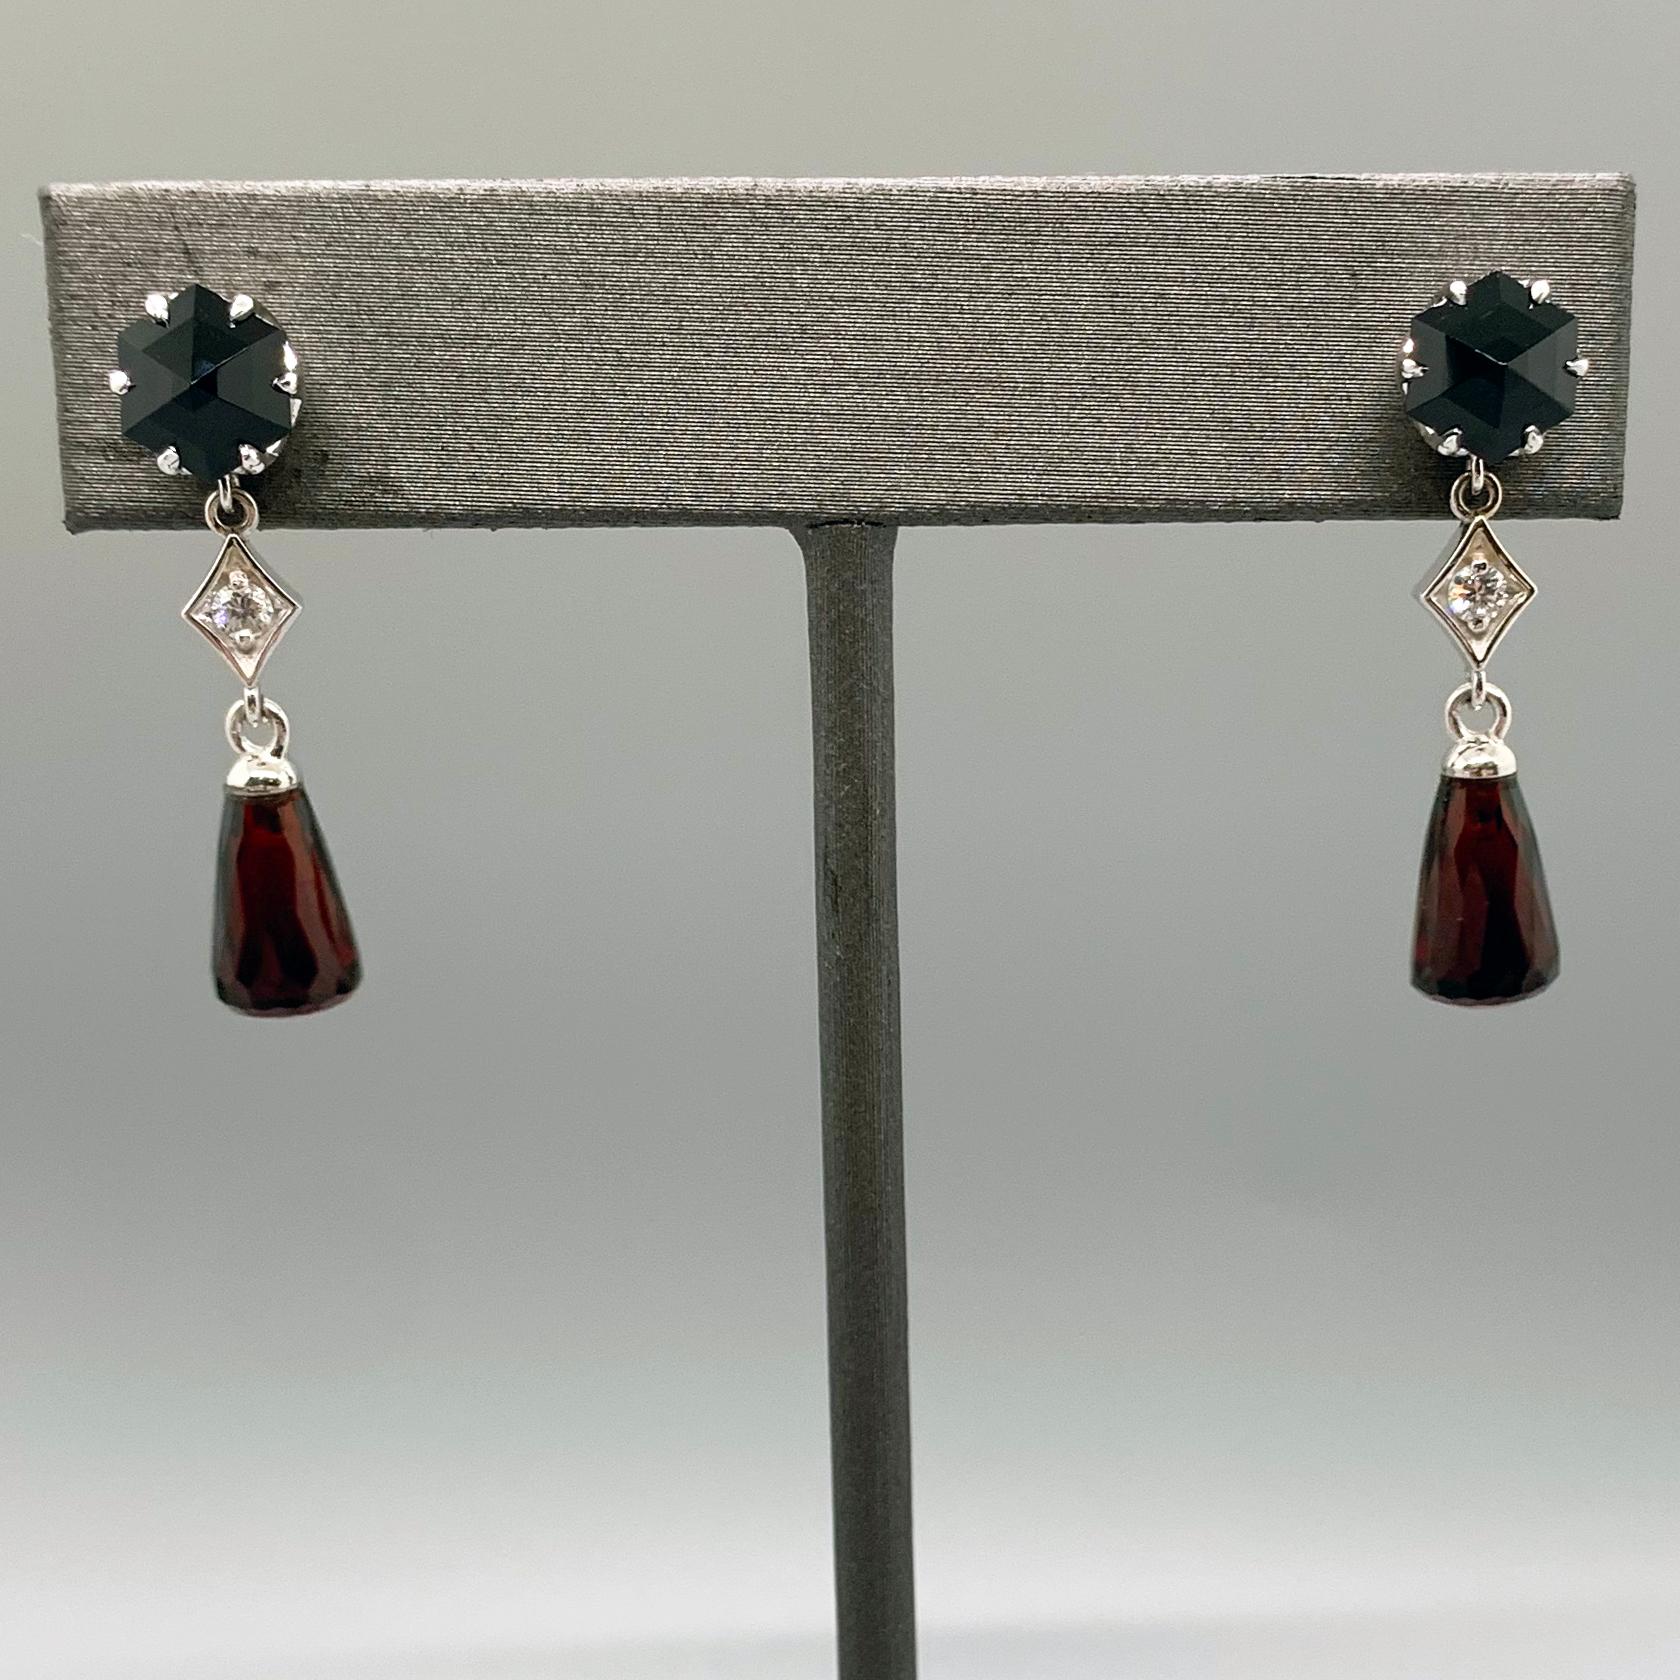 A wealthy young woman slips down the stairs of her family home on a Friday evening in 1920s London. The dim lamplight catches on the fringe of her beaded dress and in the deep red garnet drops that hang from each ear. 

These earrings, nicknamed